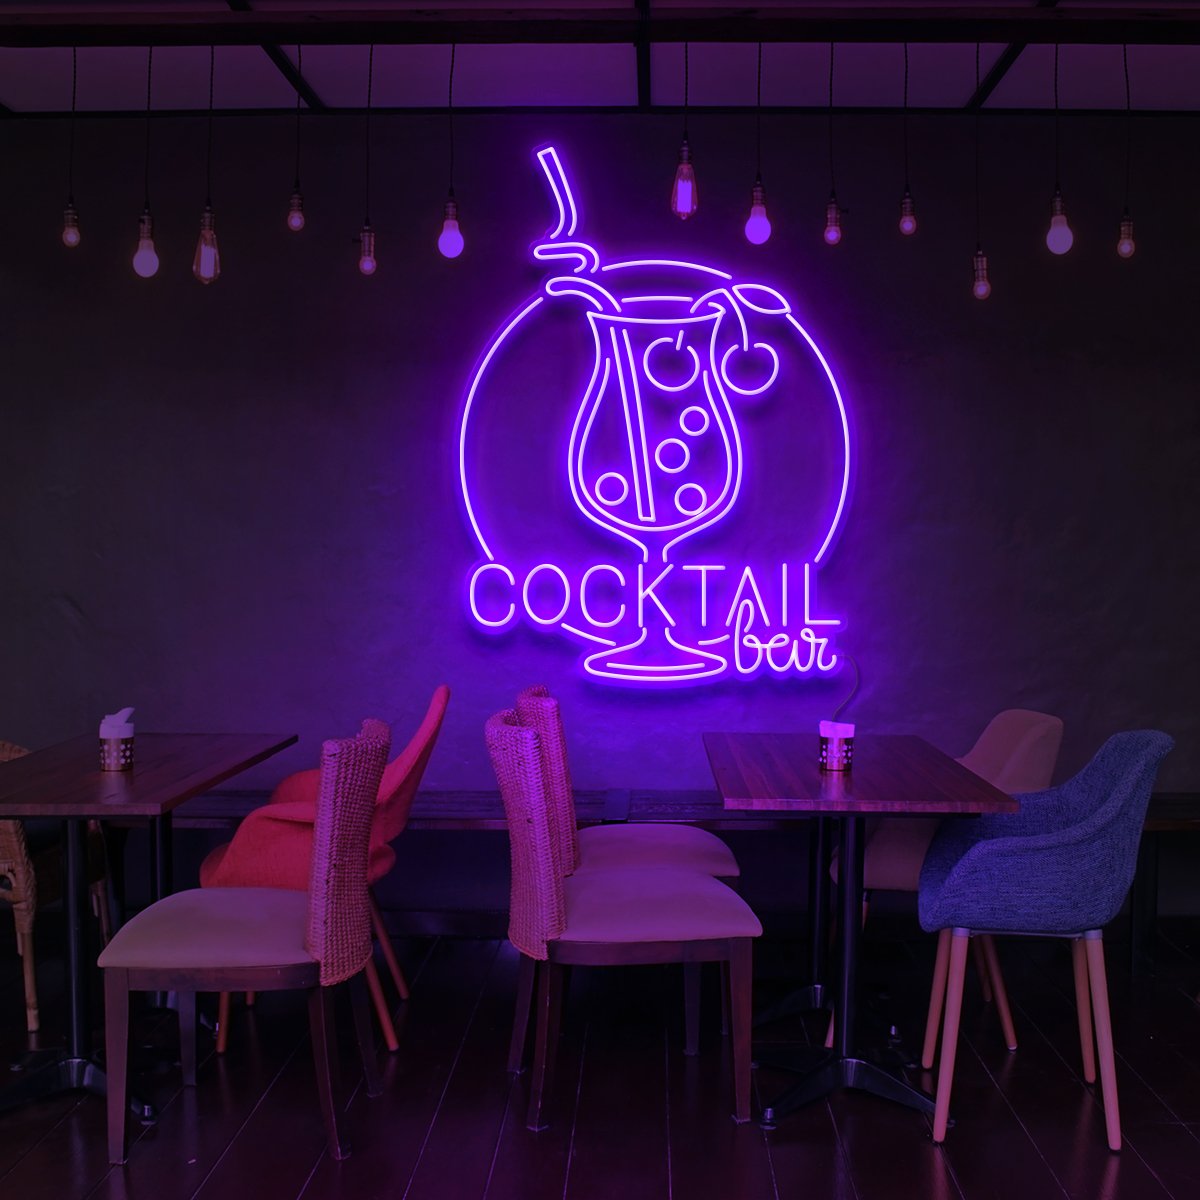 "Cocktail Bar" Neon Sign for Bars & Restaurants 90cm (3ft) / Purple / LED Neon by Neon Icons